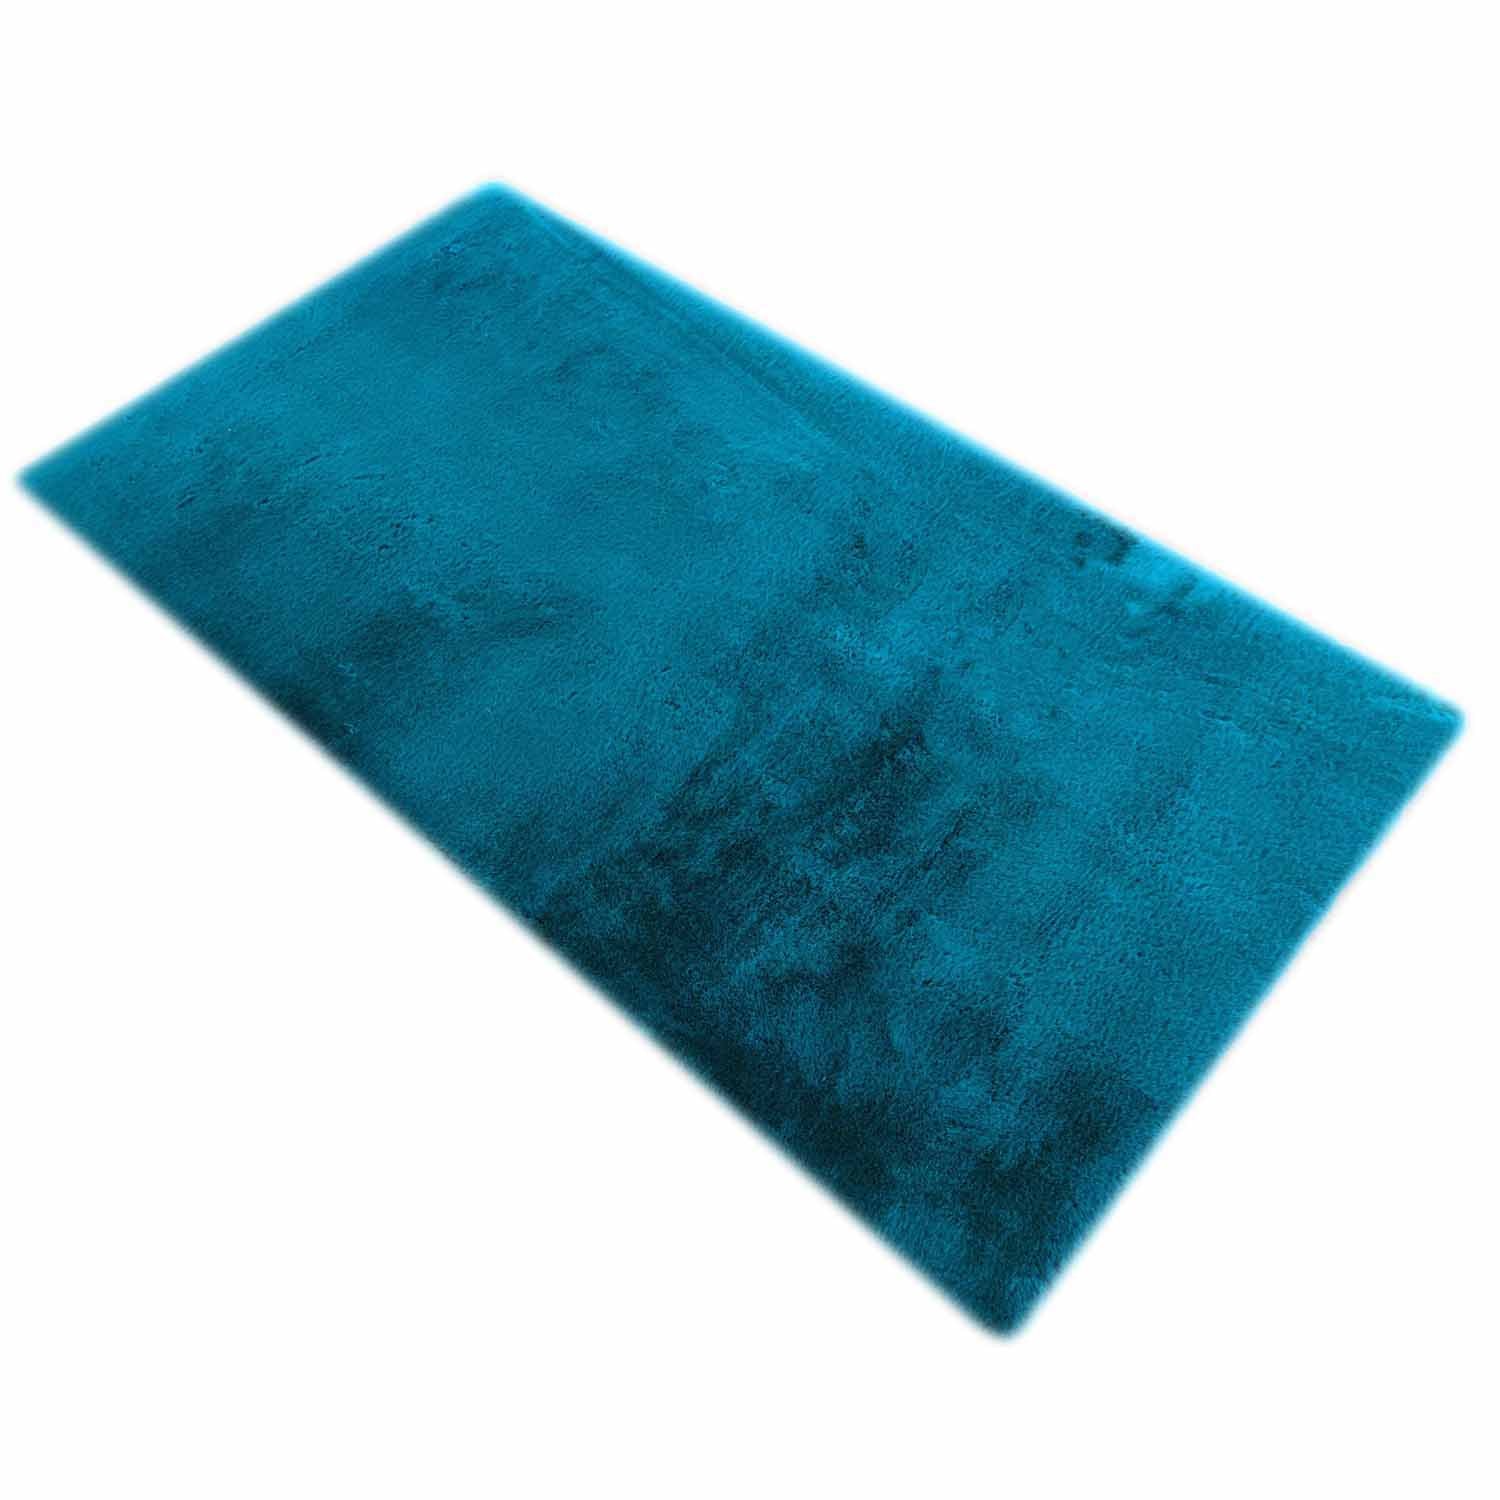 The Home Living Room Bambi Rug 80cm x 150cm - Teal 1 Shaws Department Stores